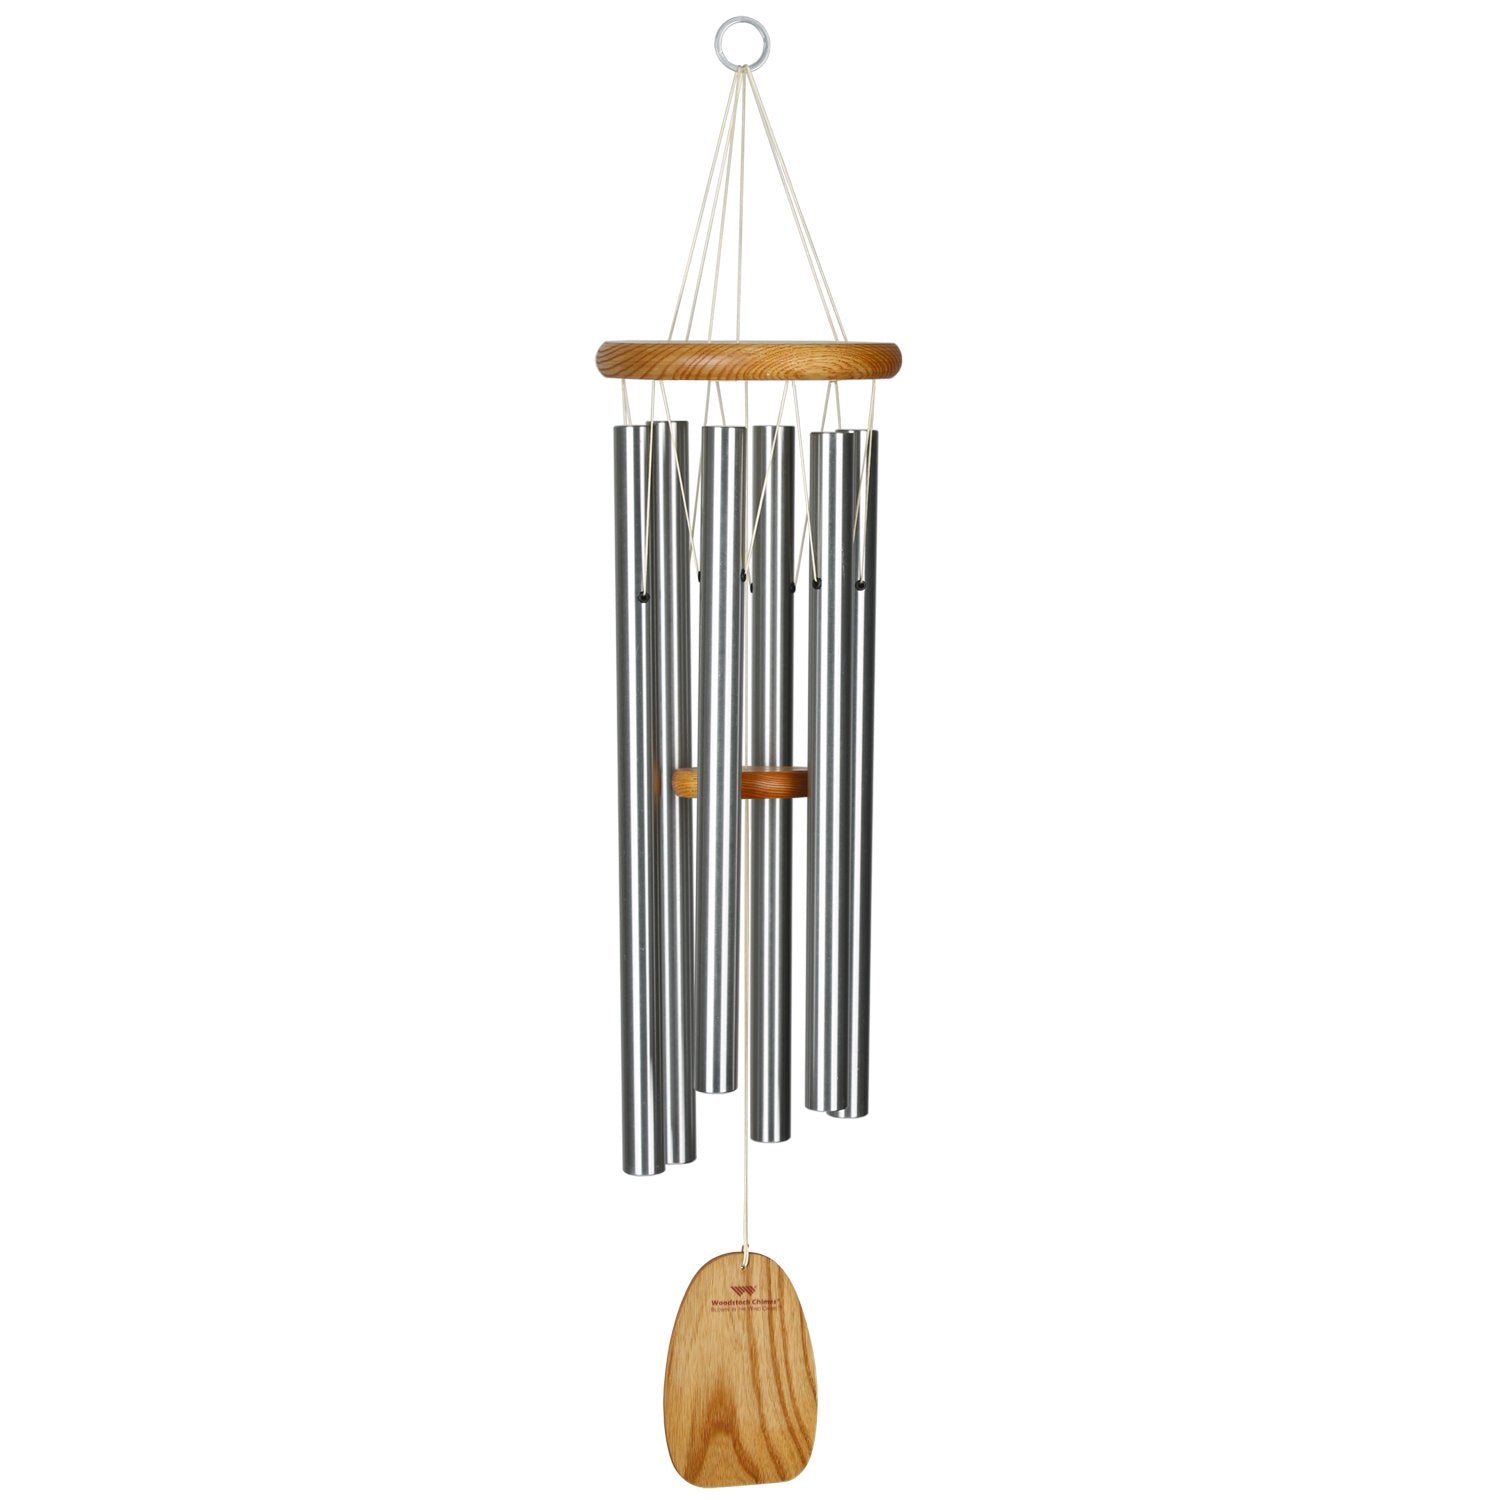 Blowin' In The Wind Chime full product image